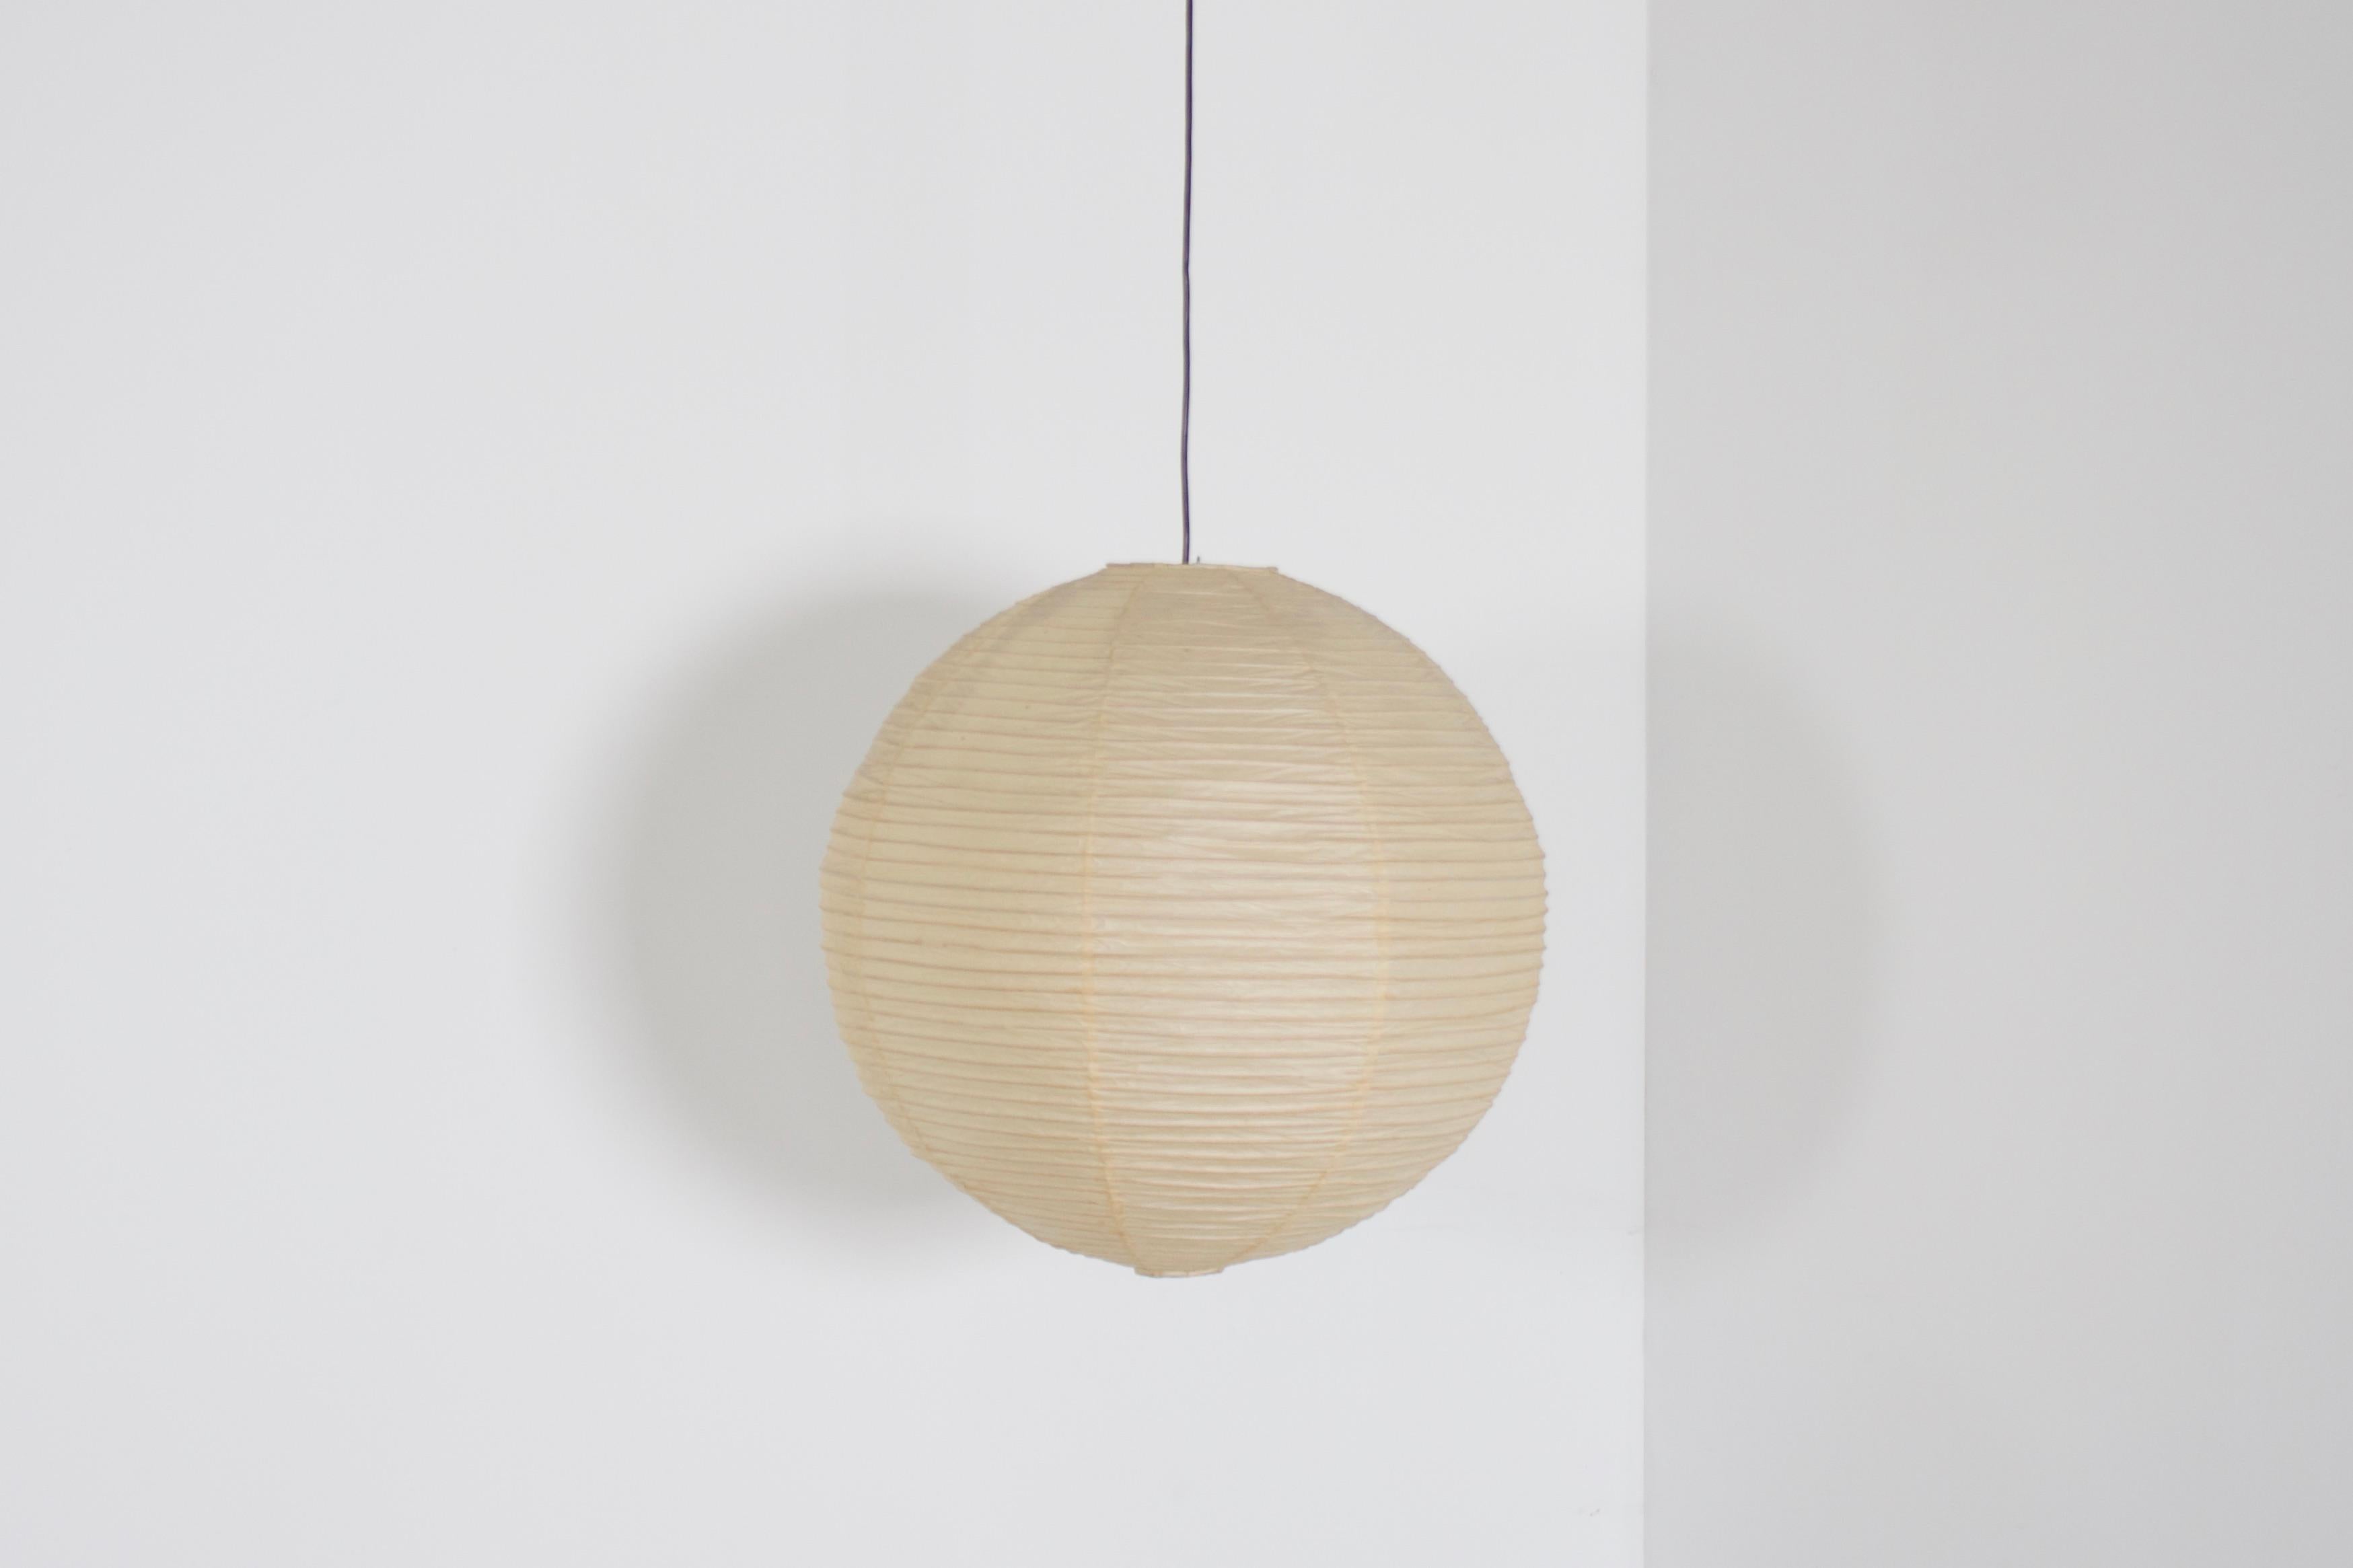 Early 19A Akari lamp in good condition.

Designed by Isamu Noguchi in 1951

Produced by Ozeki & Co., Ltd.

Model 19A was the first globe-shaped light in the Akari series, identifiable by the suffix ‘A’.

This example features the earliest